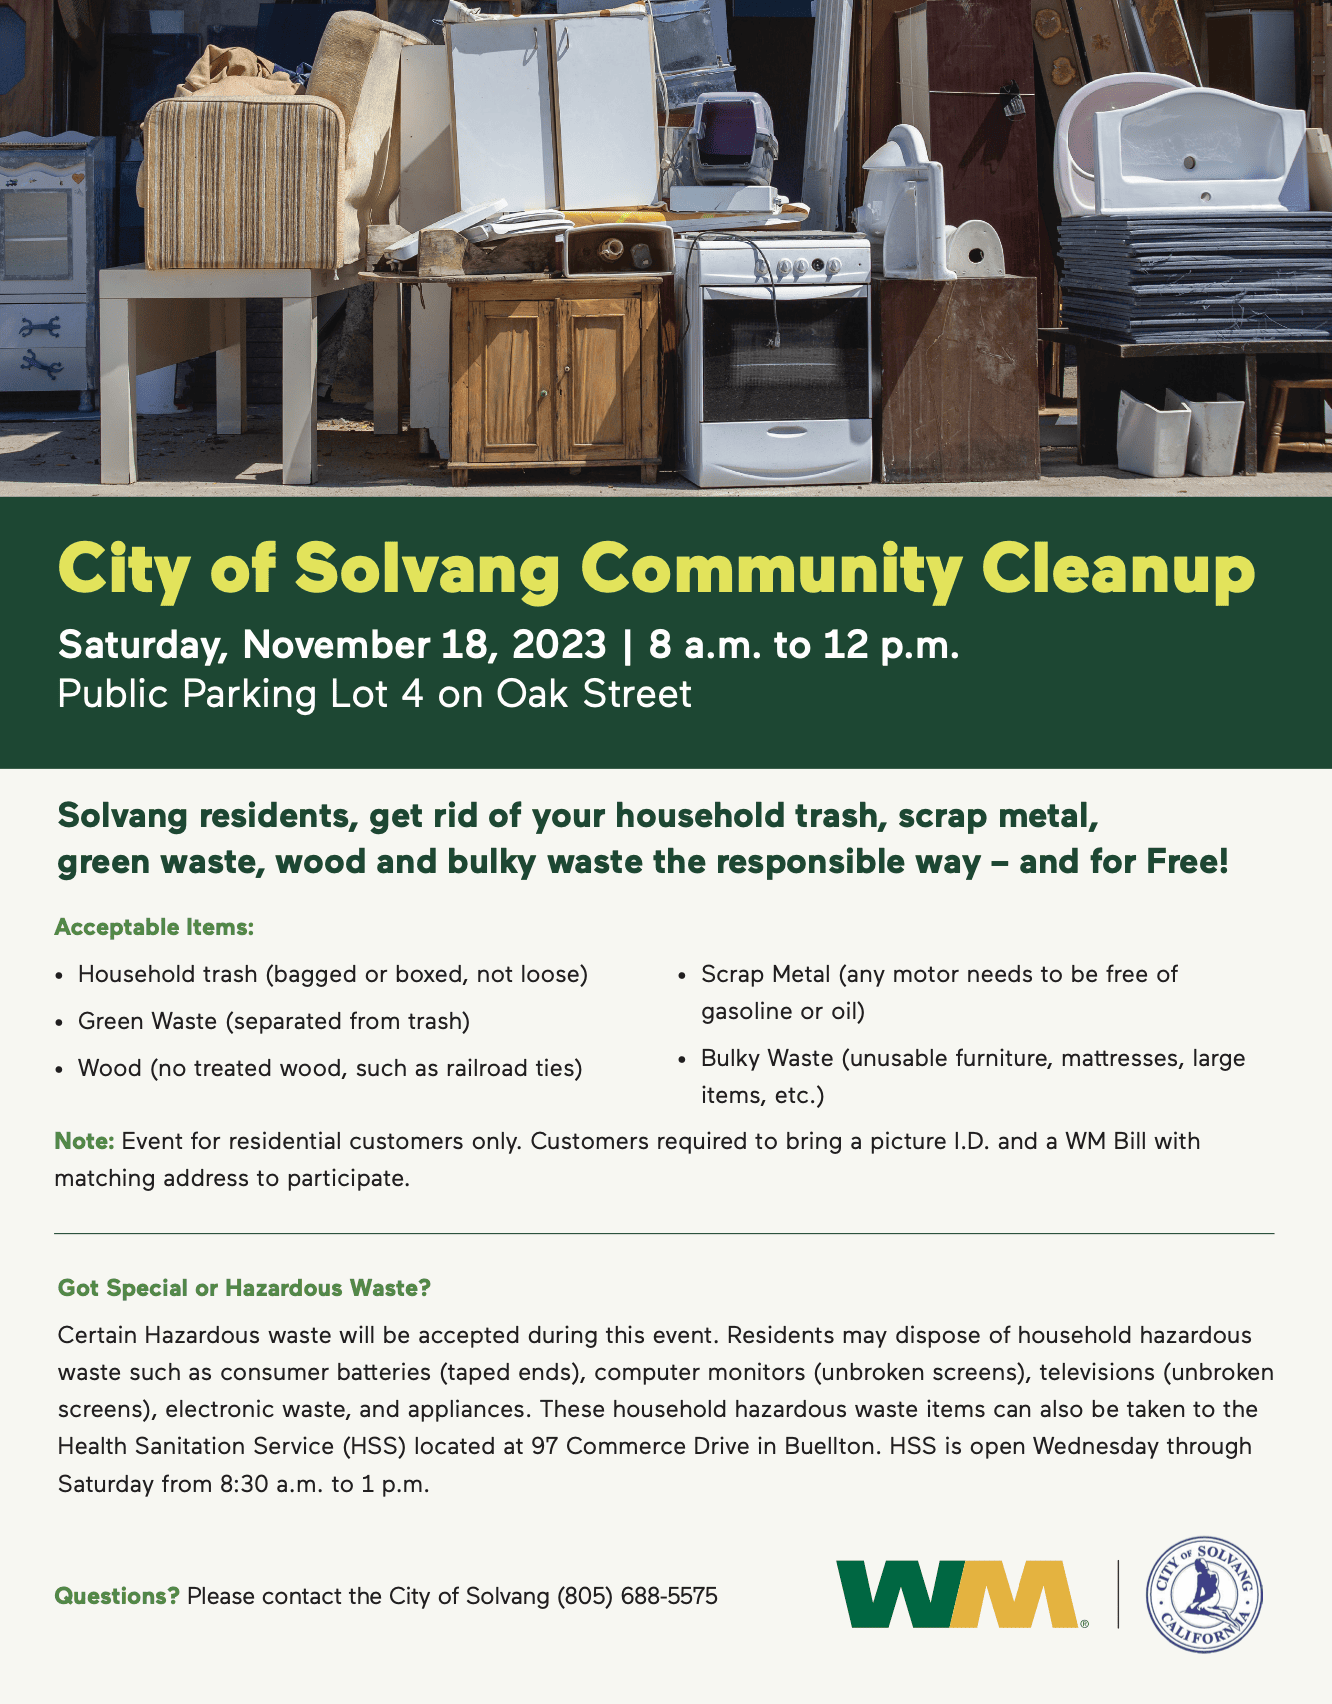 City of Solvang Community Cleanup